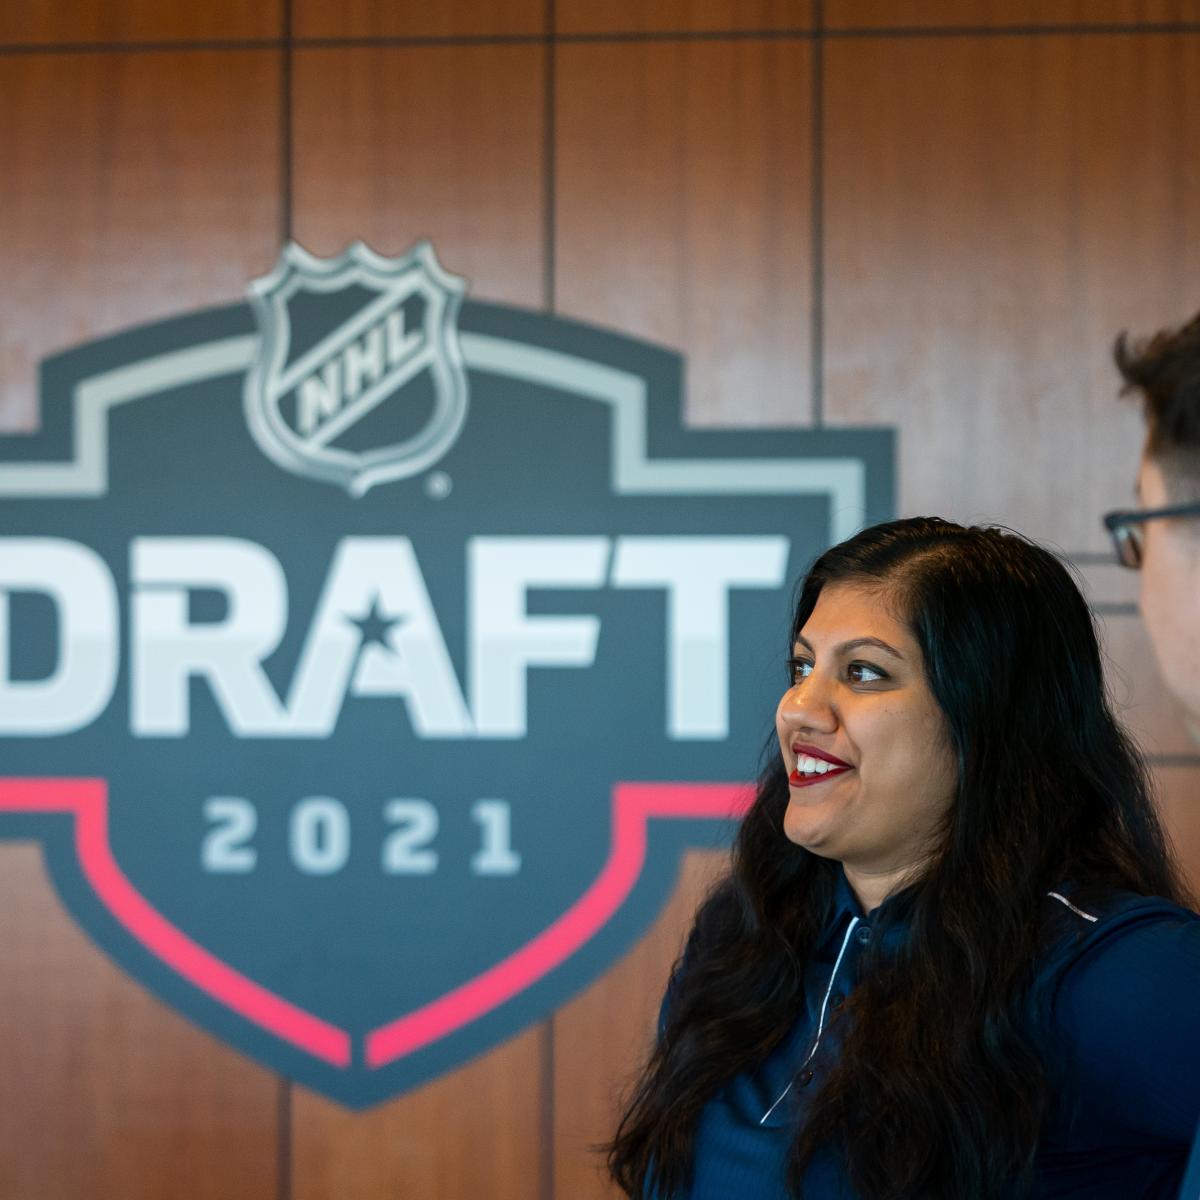 NHL Draft 2021: Grades and Analysis for All 32 Teams | Bleacher Report